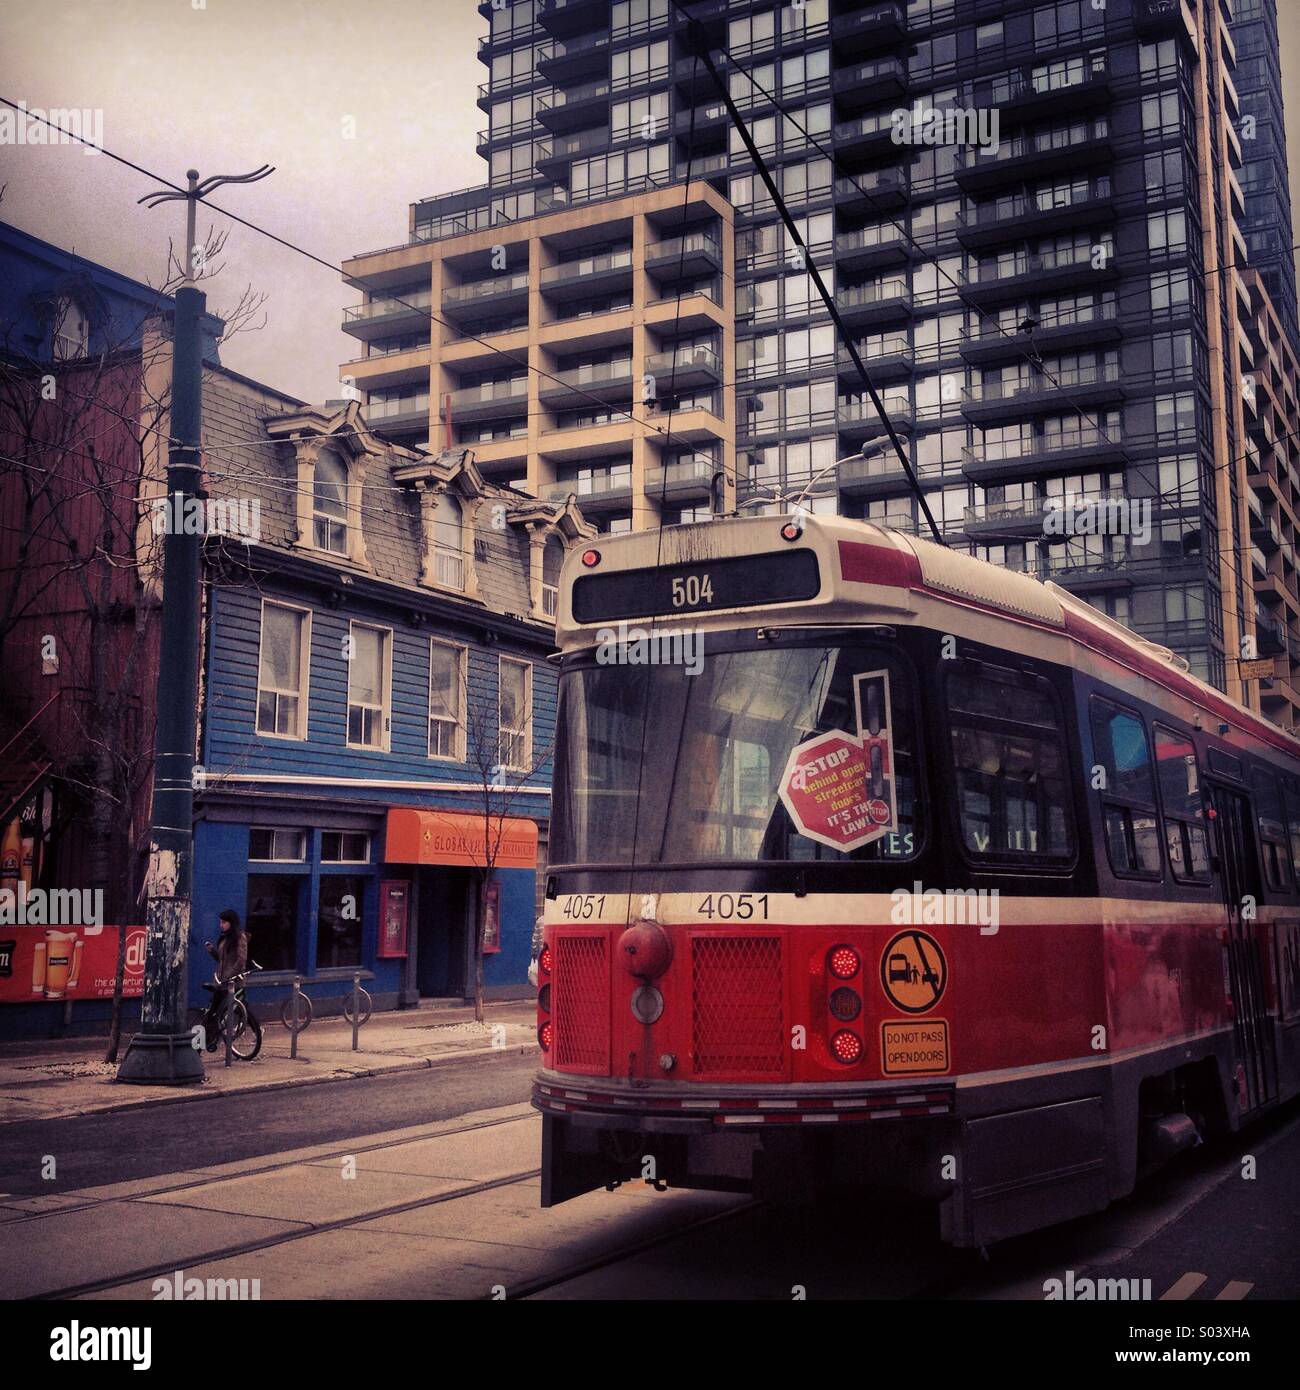 Tram car with old and new architecture buildings, Toronto, Canada Stock Photo